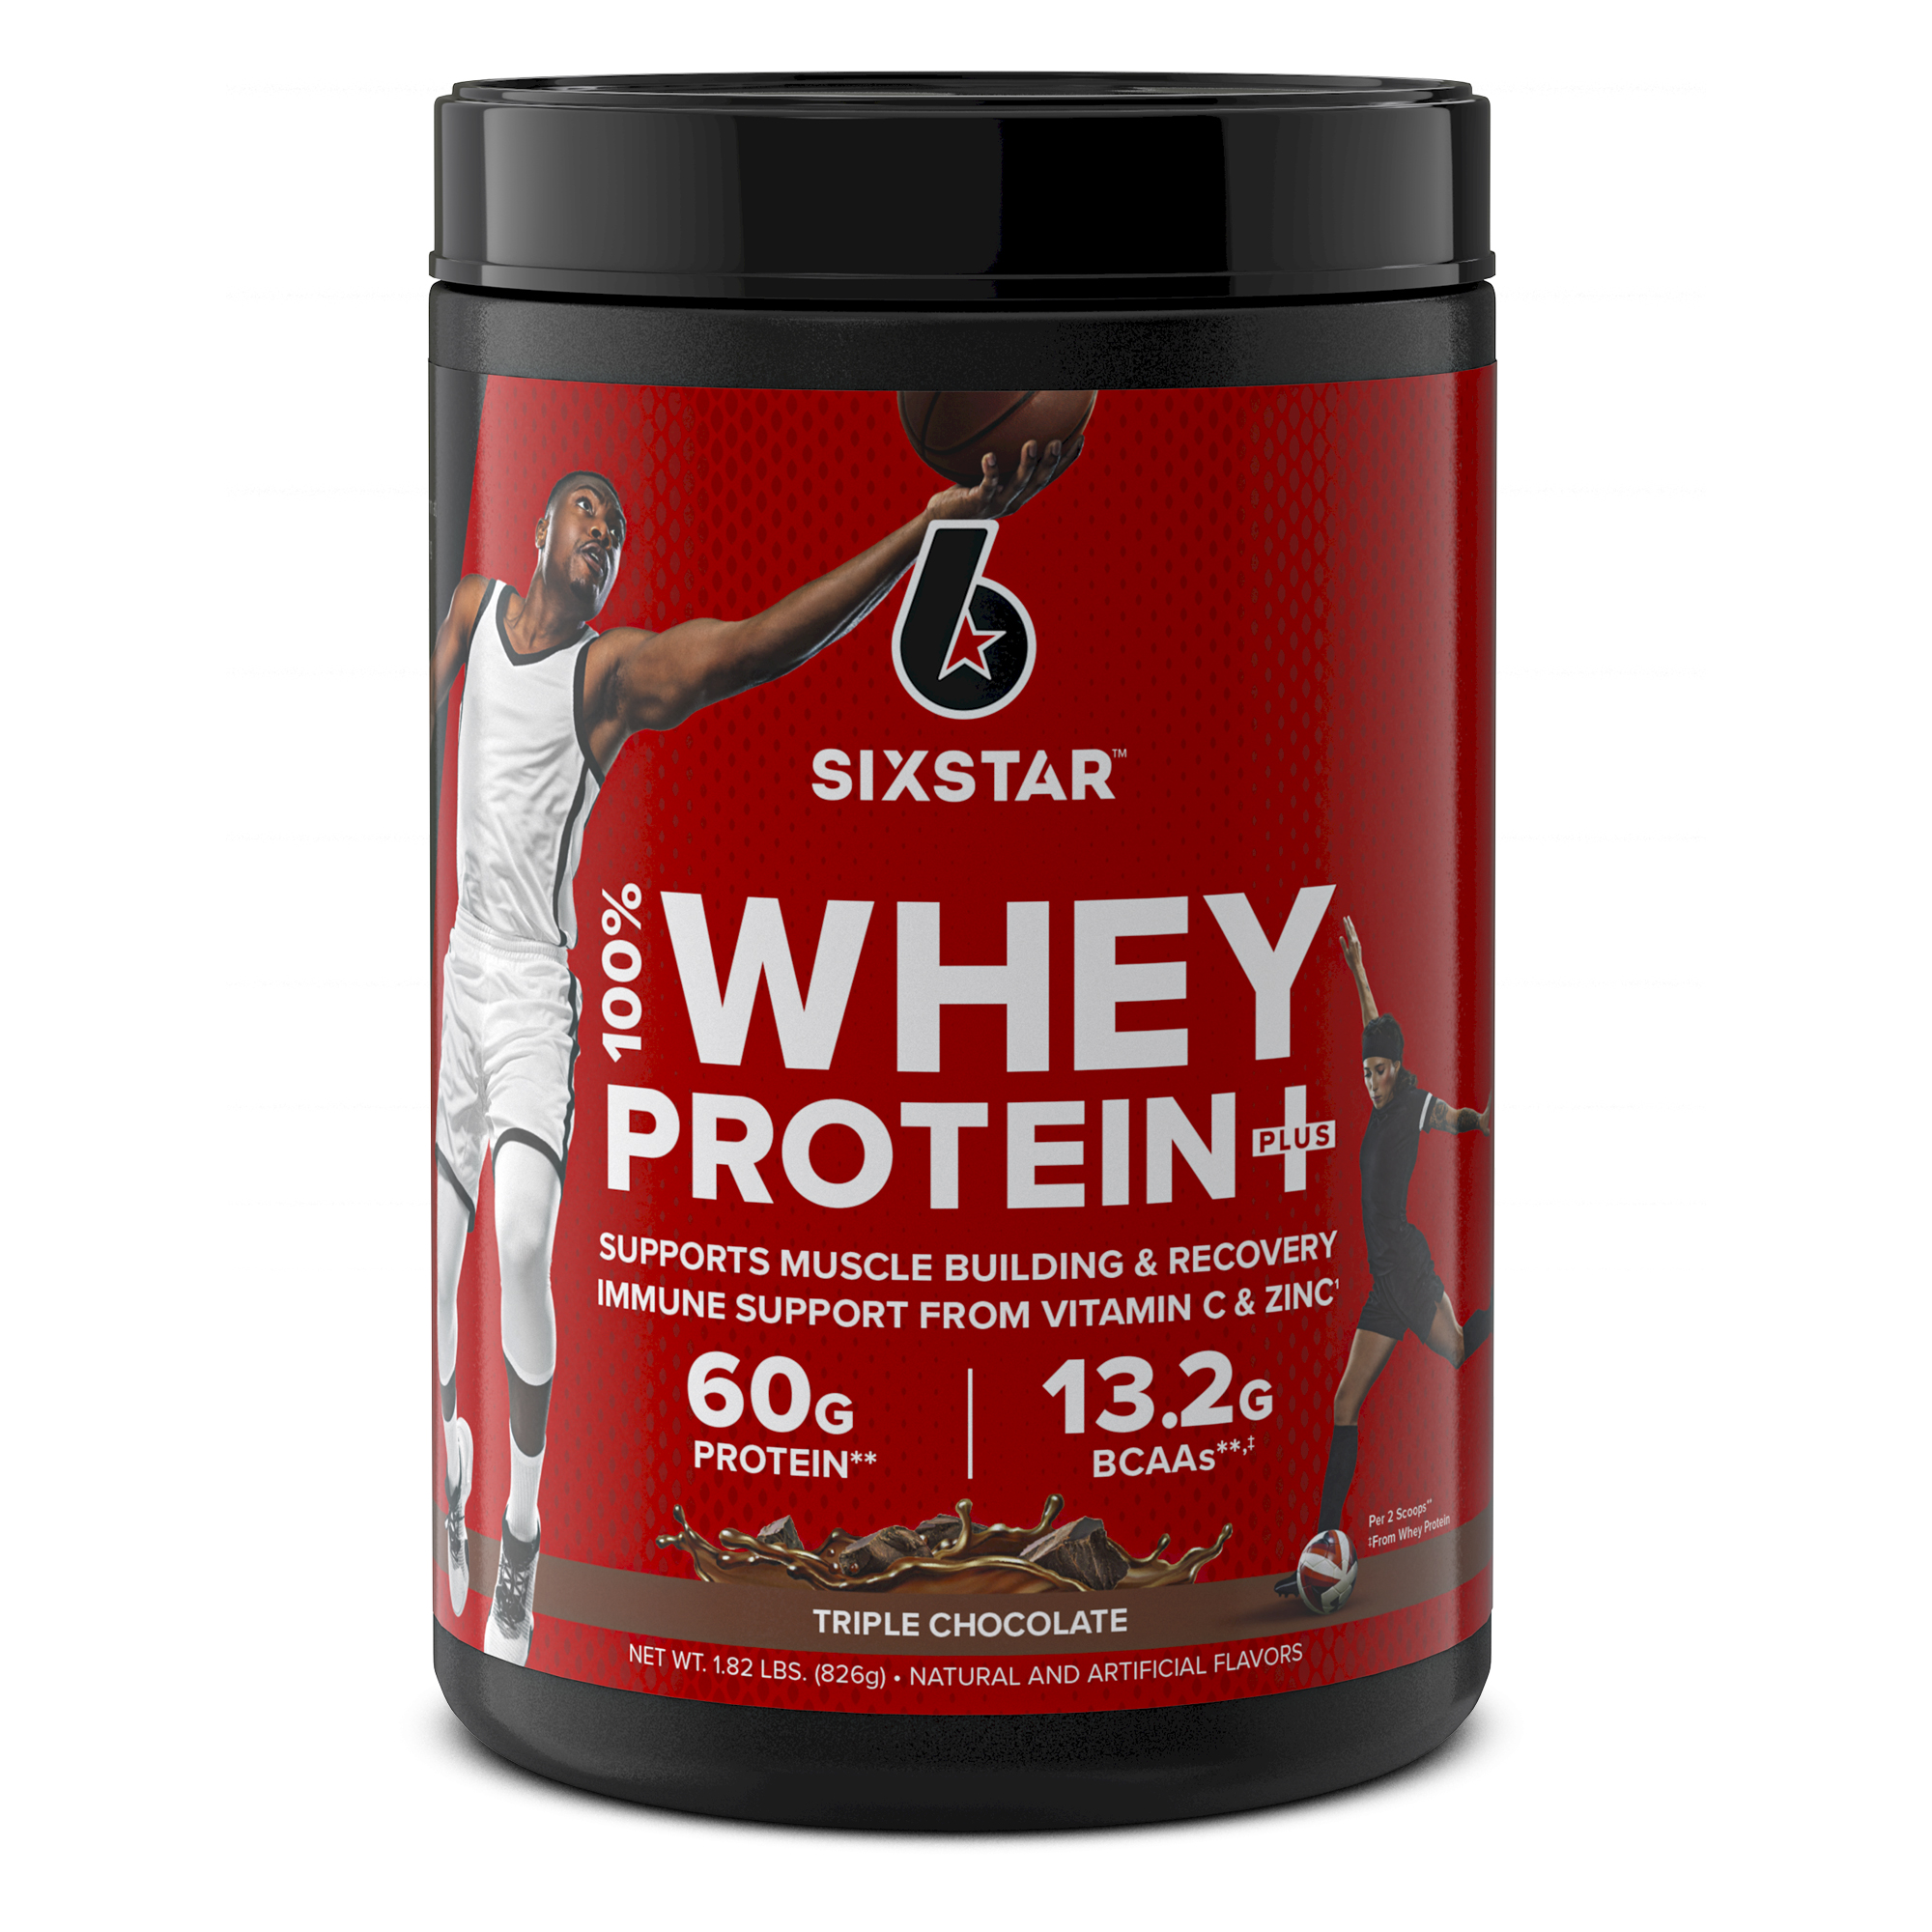 Six Star 100% Whey Protein Plus, 32g Ultra-Pure Whey Protein Powder, Triple Chocolate, 2lb - image 1 of 12